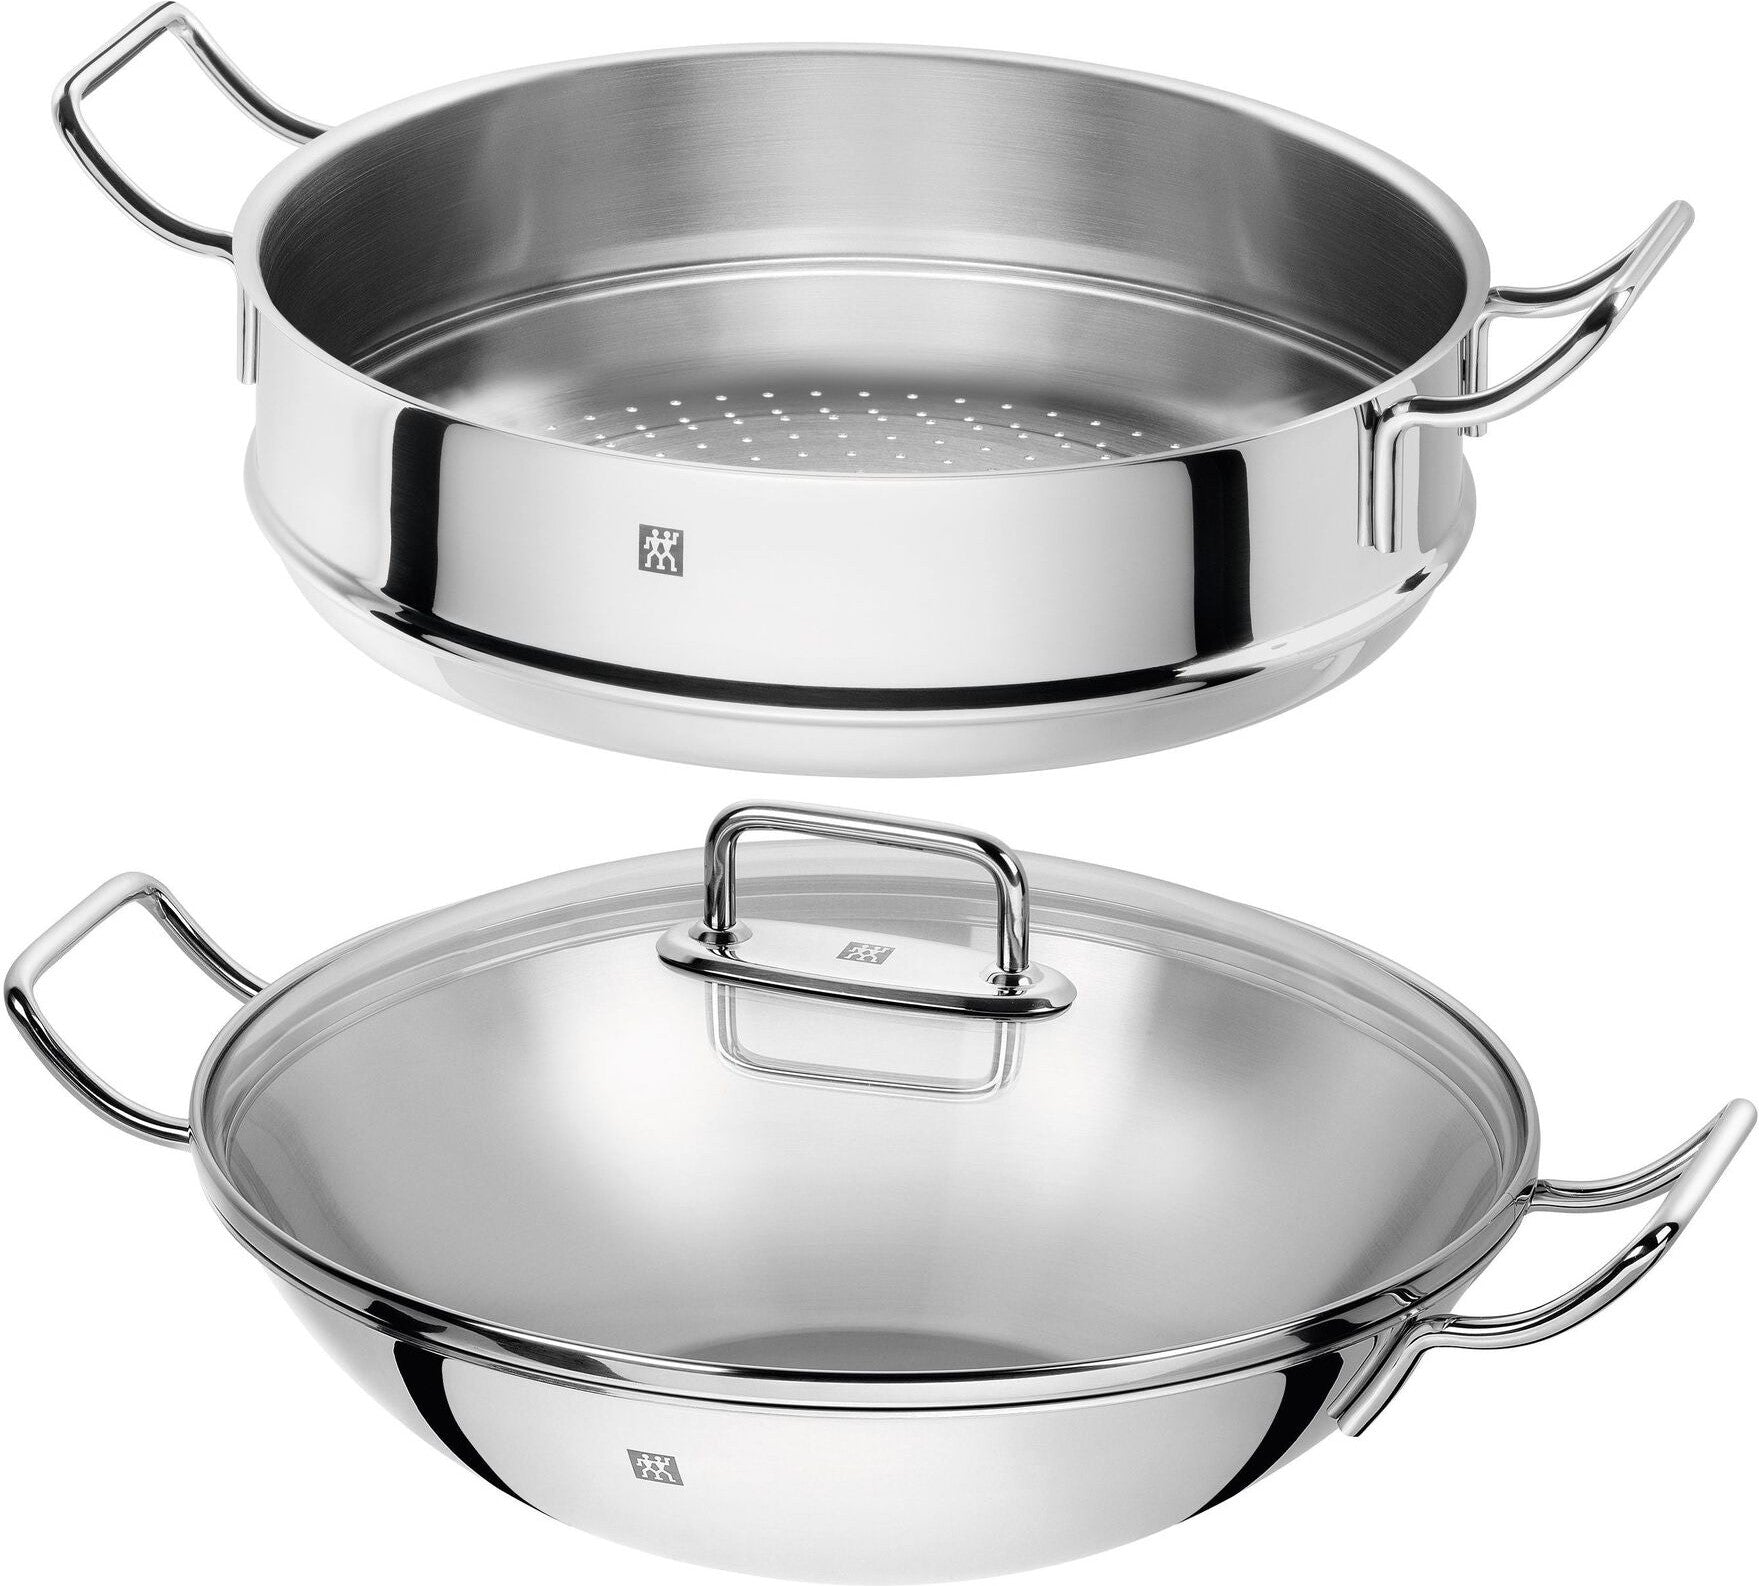 Zwilling - Plus 12.5" Stainless Steel Wok with Steamer - 40998-632